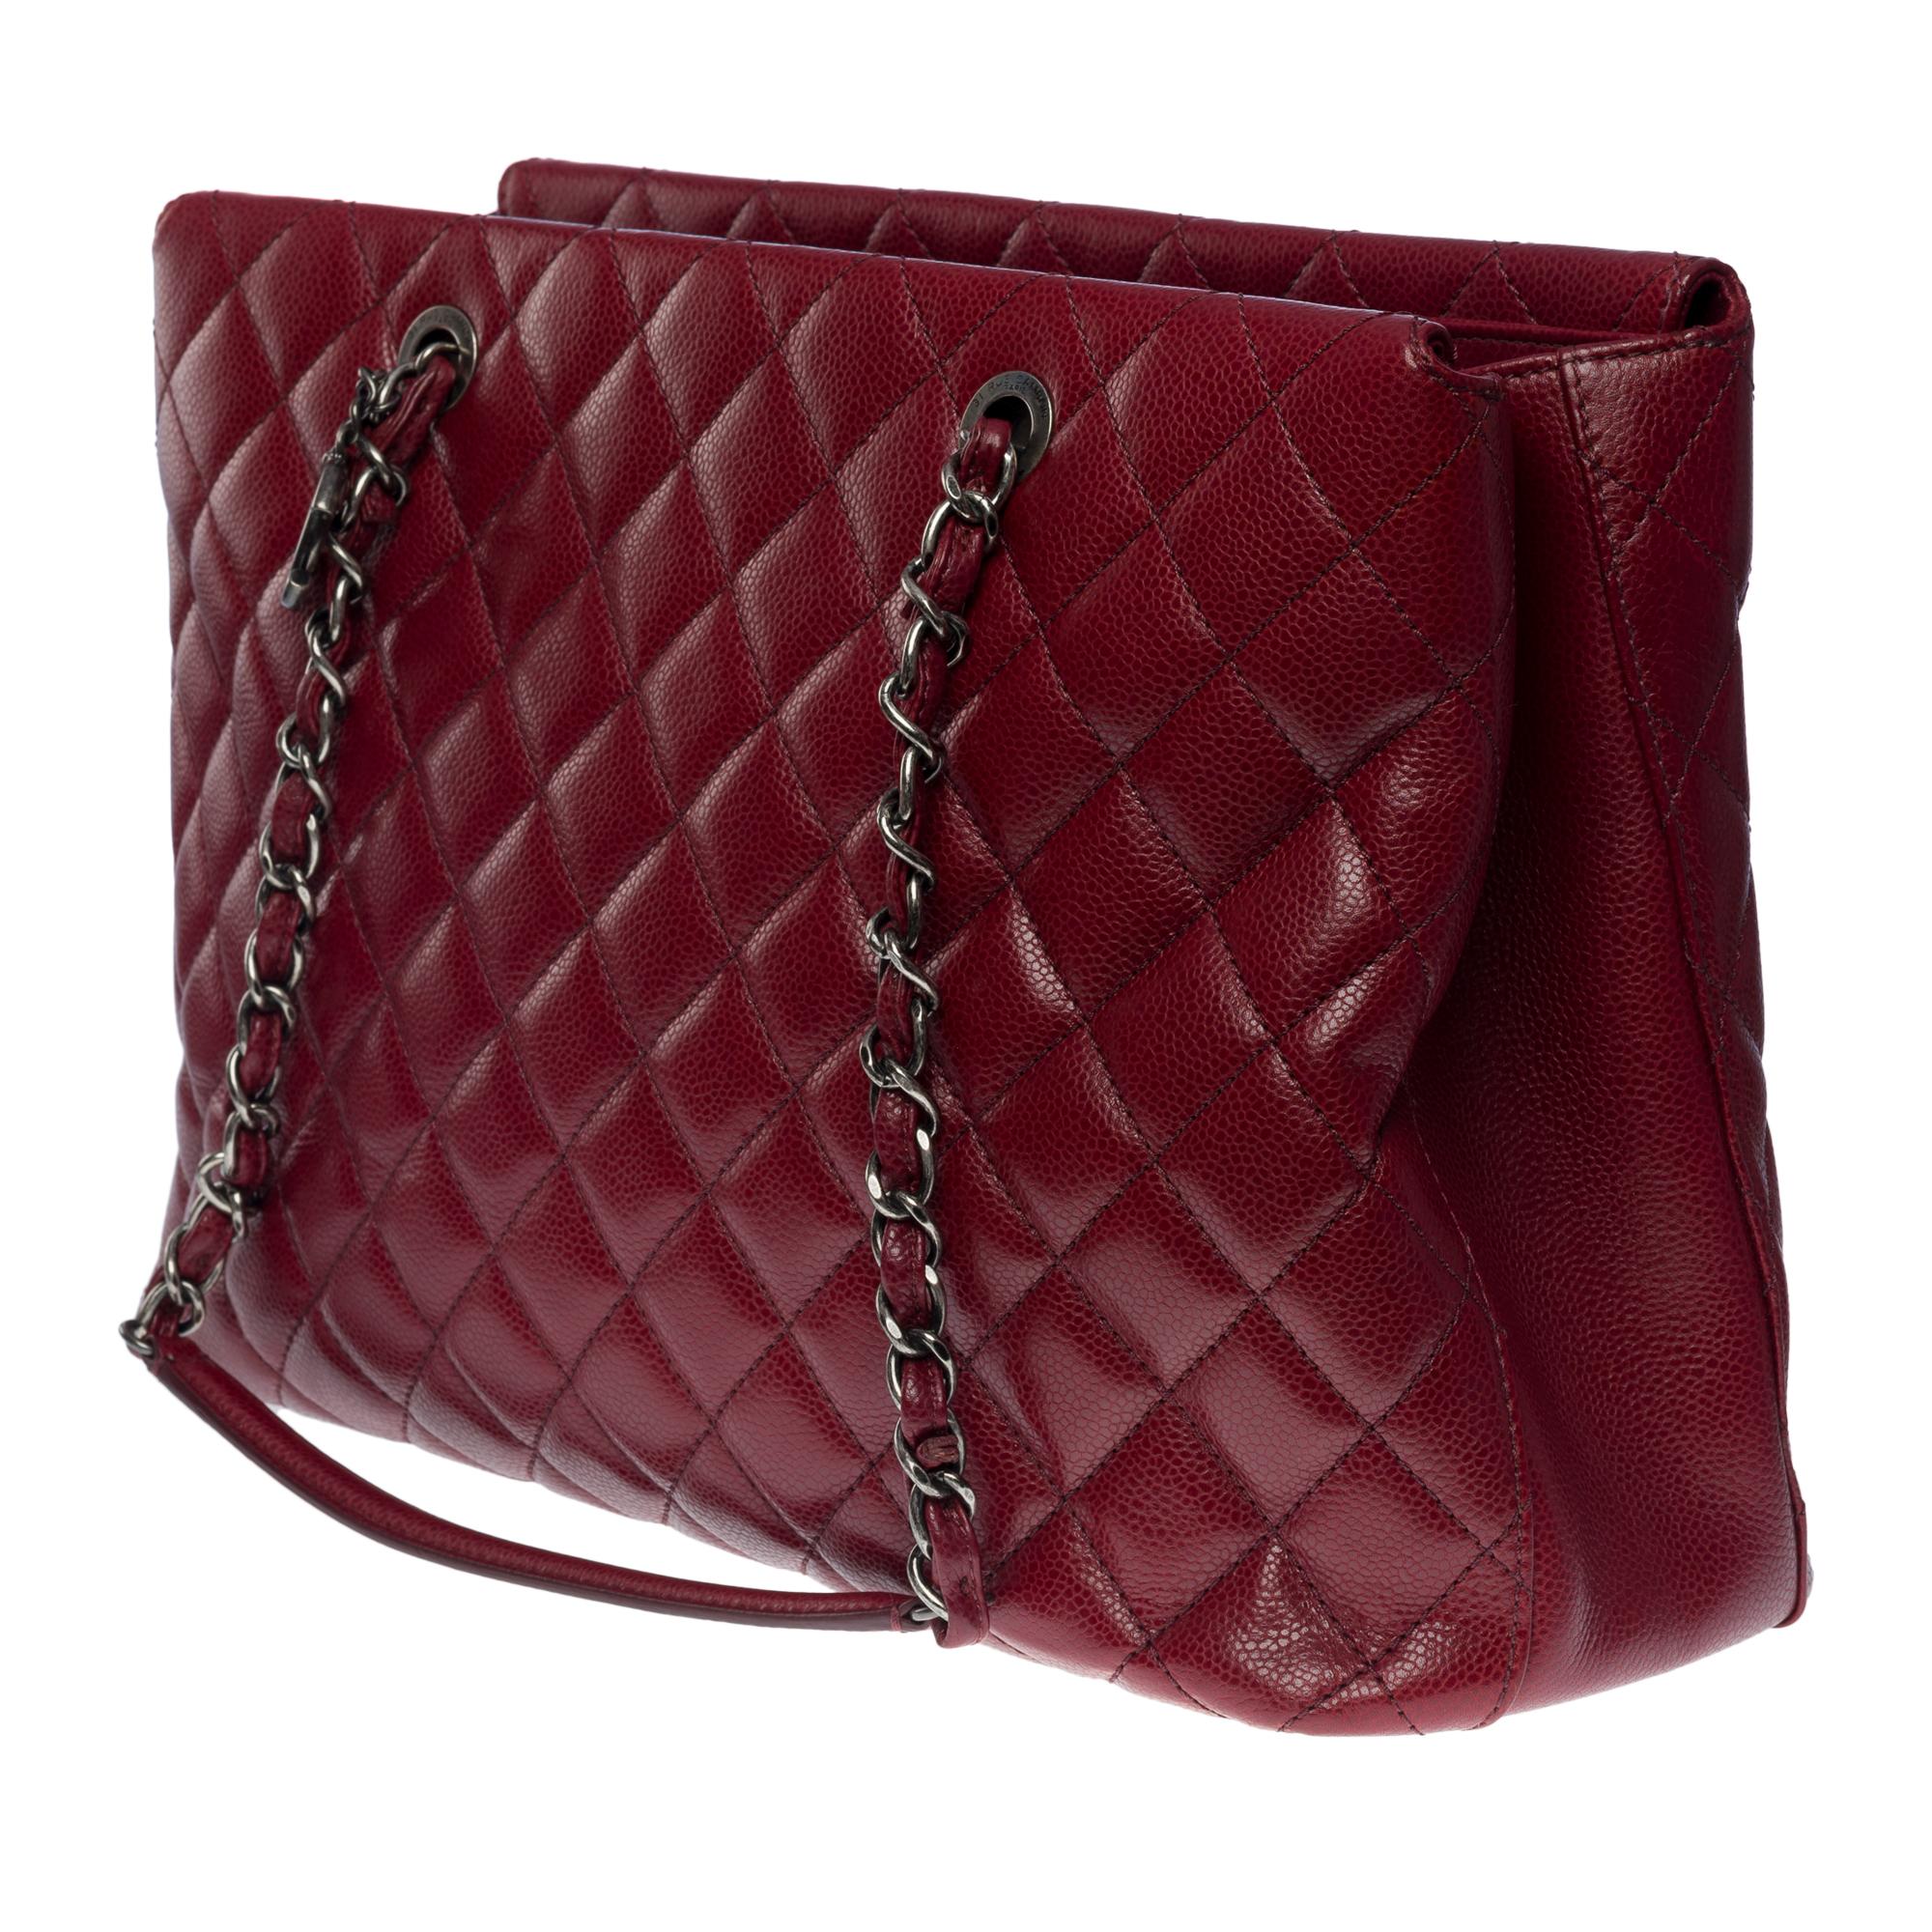 Women's Amazing Chanel Shopping Tote bag in Burgundy Caviar quilted leather, SHW